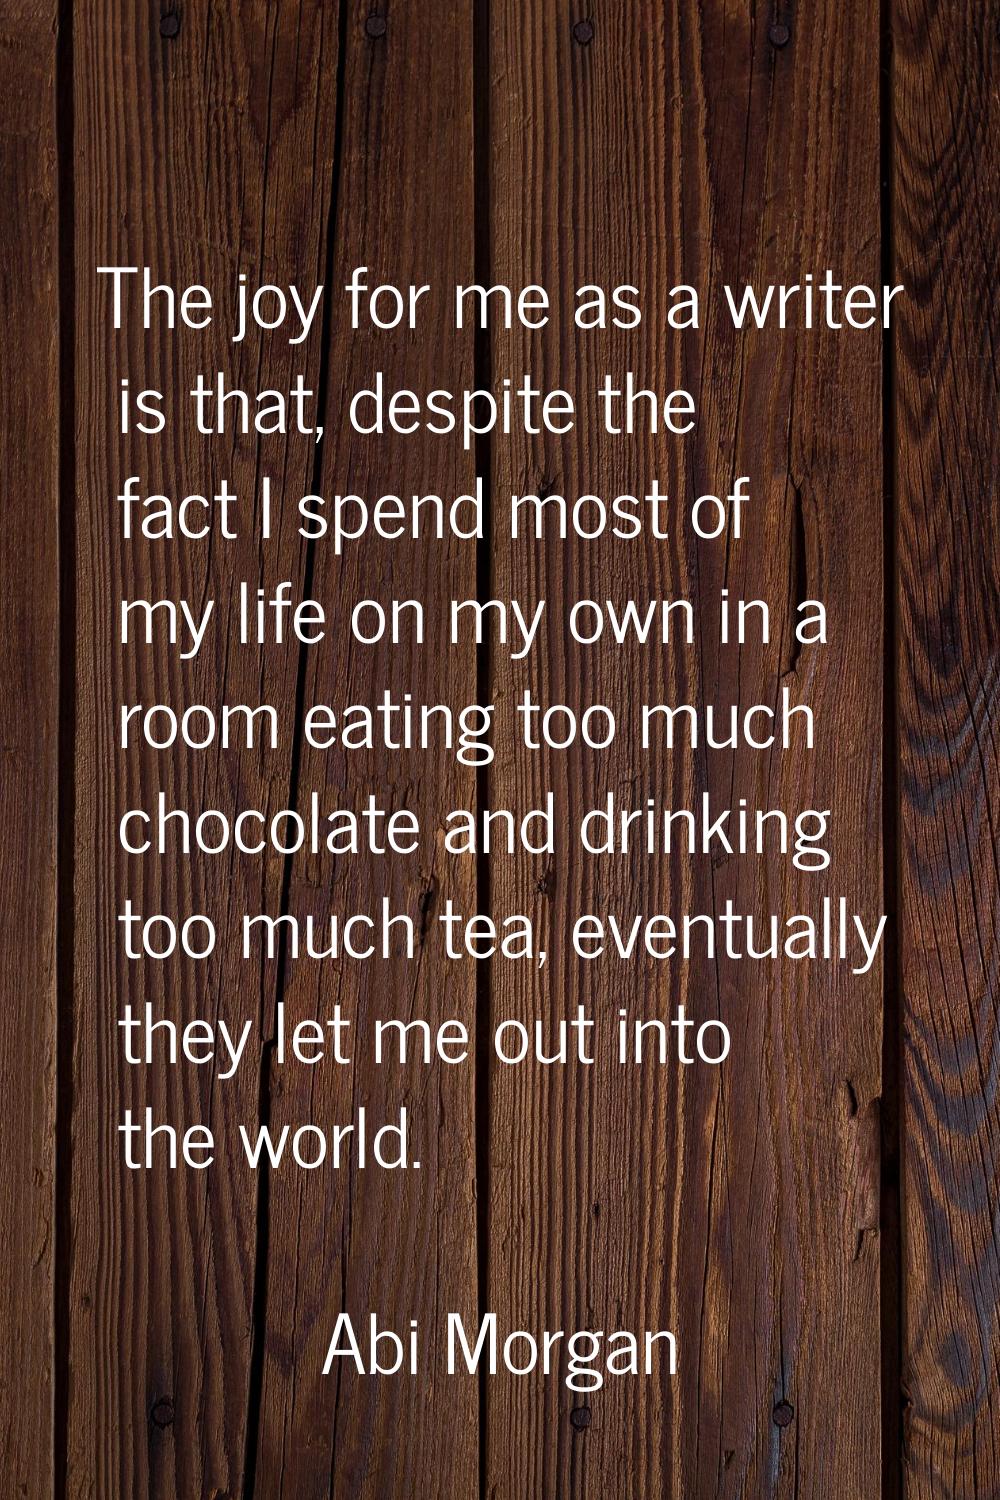 The joy for me as a writer is that, despite the fact I spend most of my life on my own in a room ea